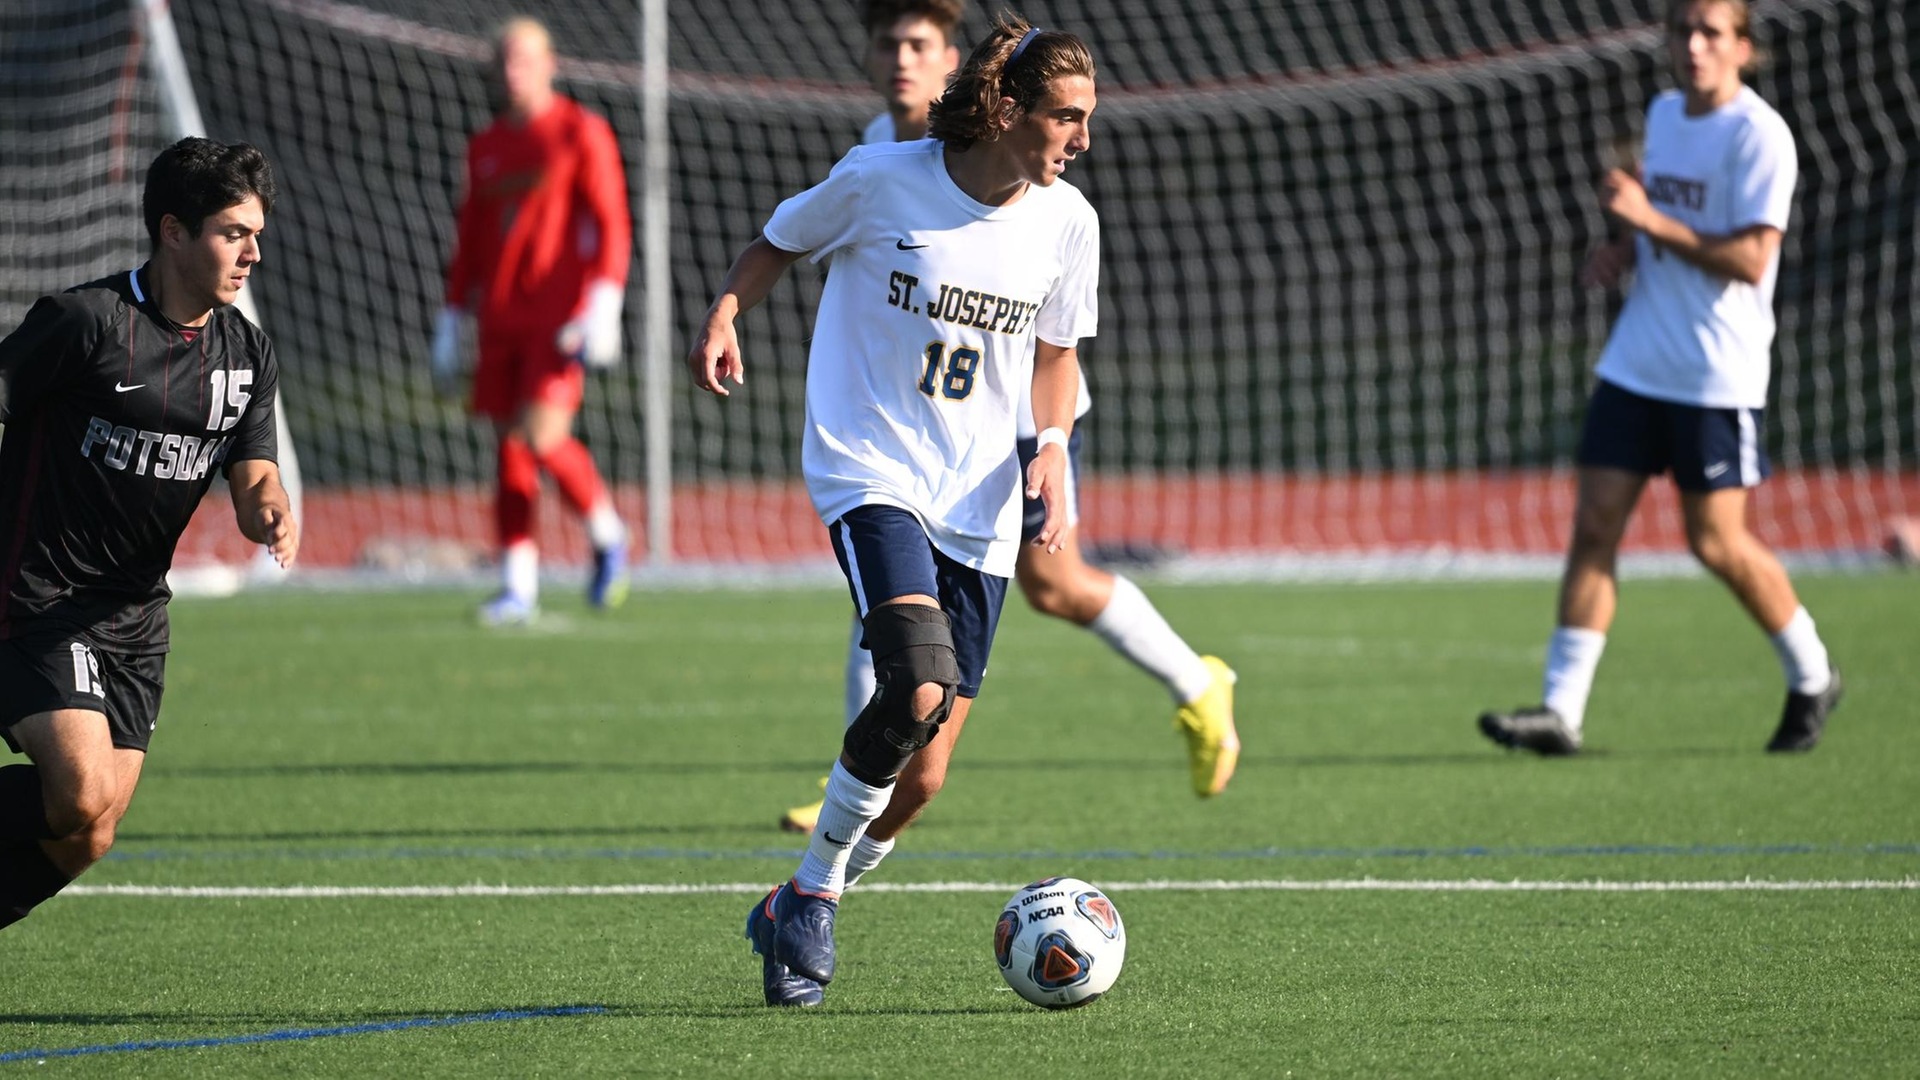 Men's Soccer and Old Westbury Play to 1-1 Draw